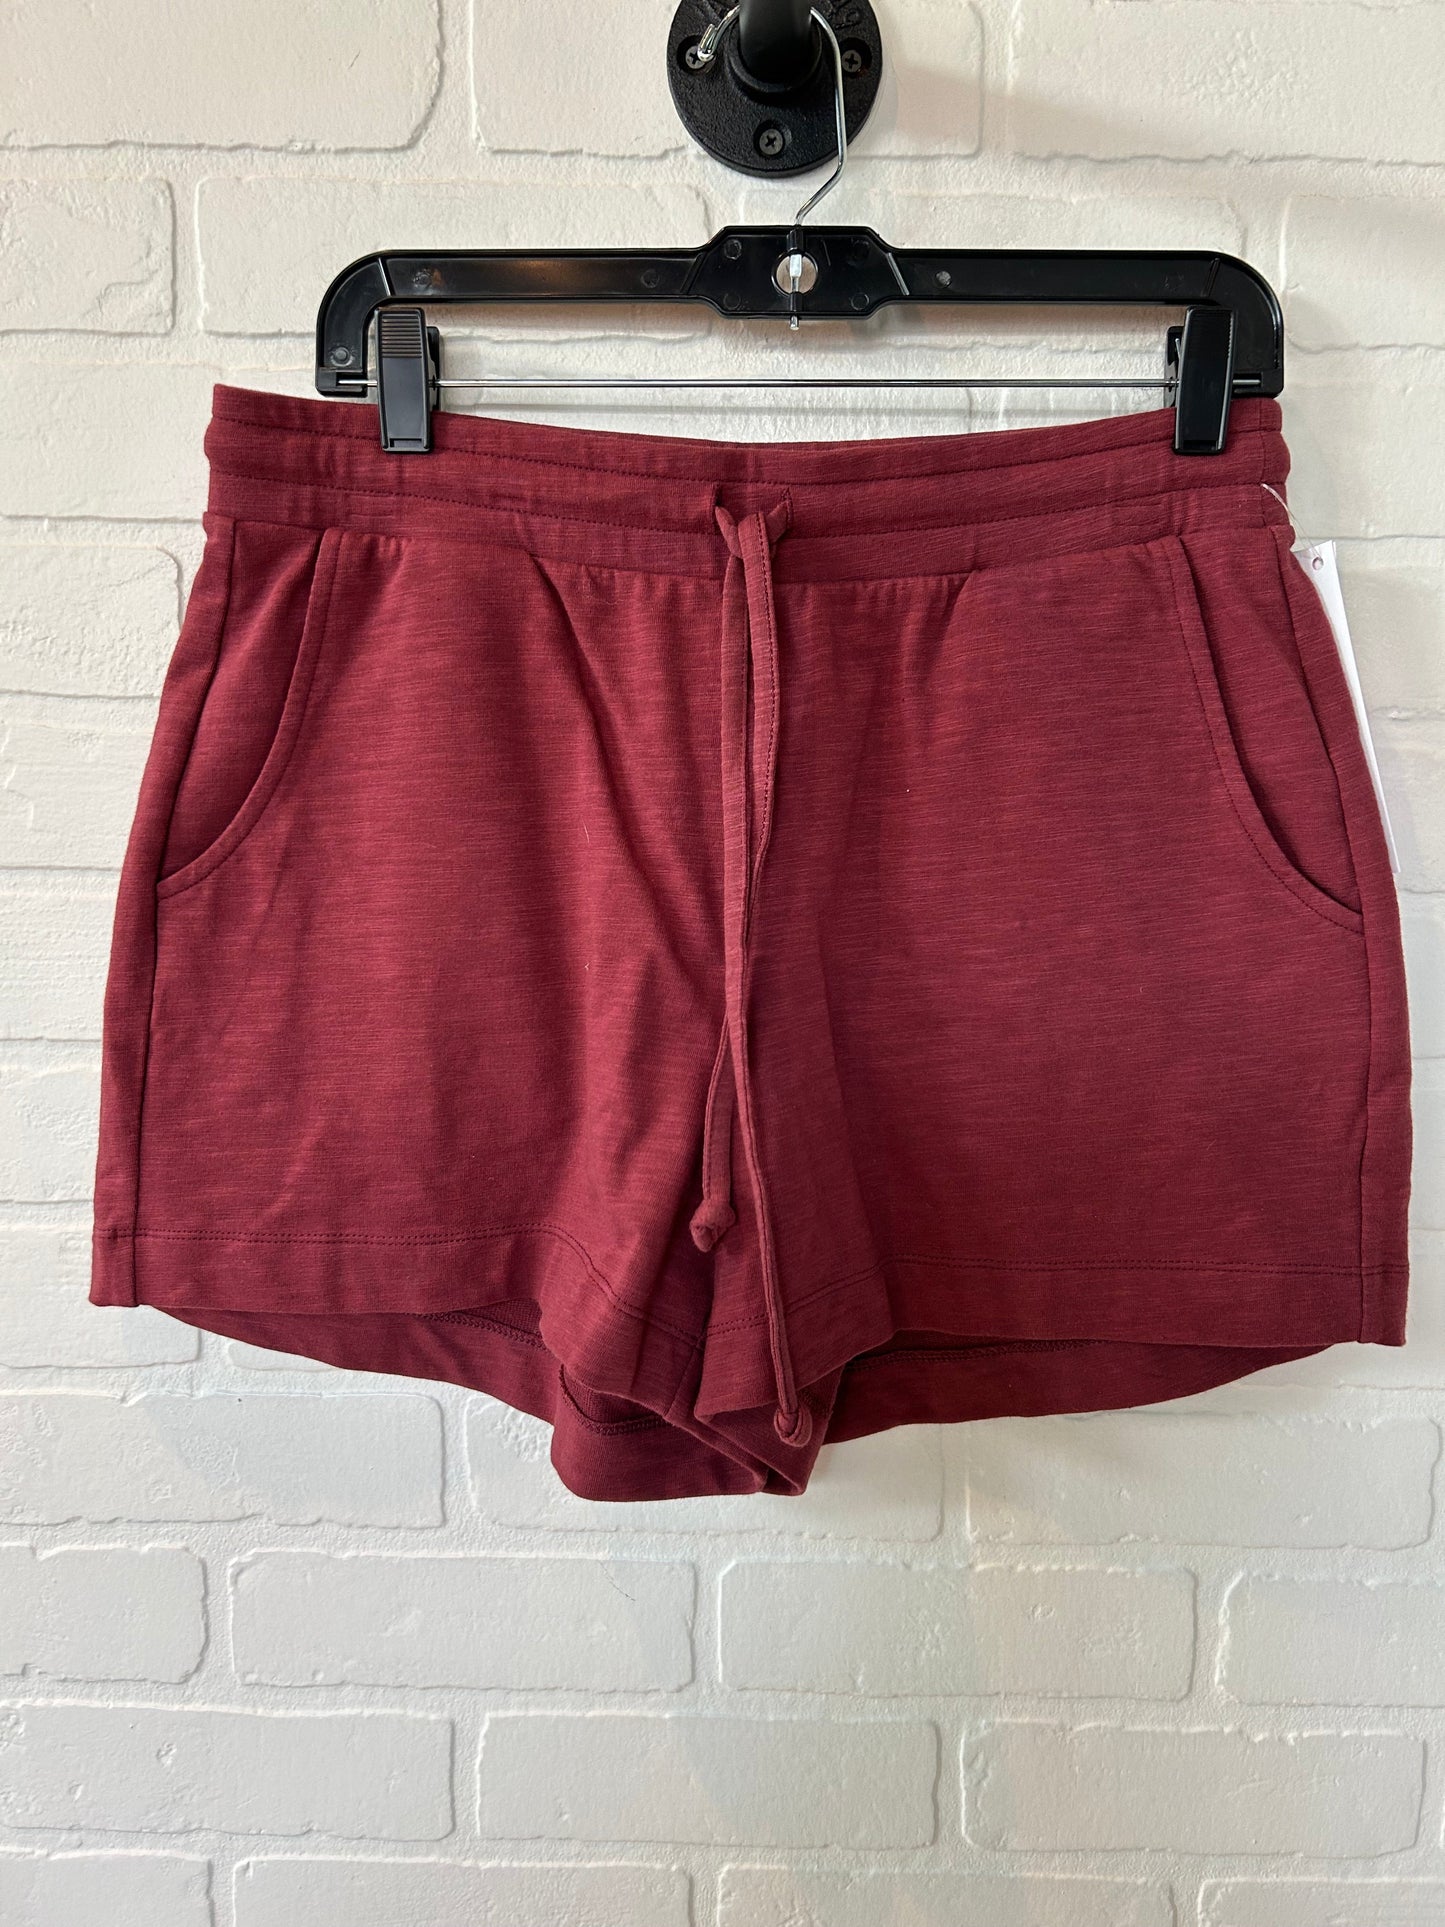 Red Shorts Cabi, Size S